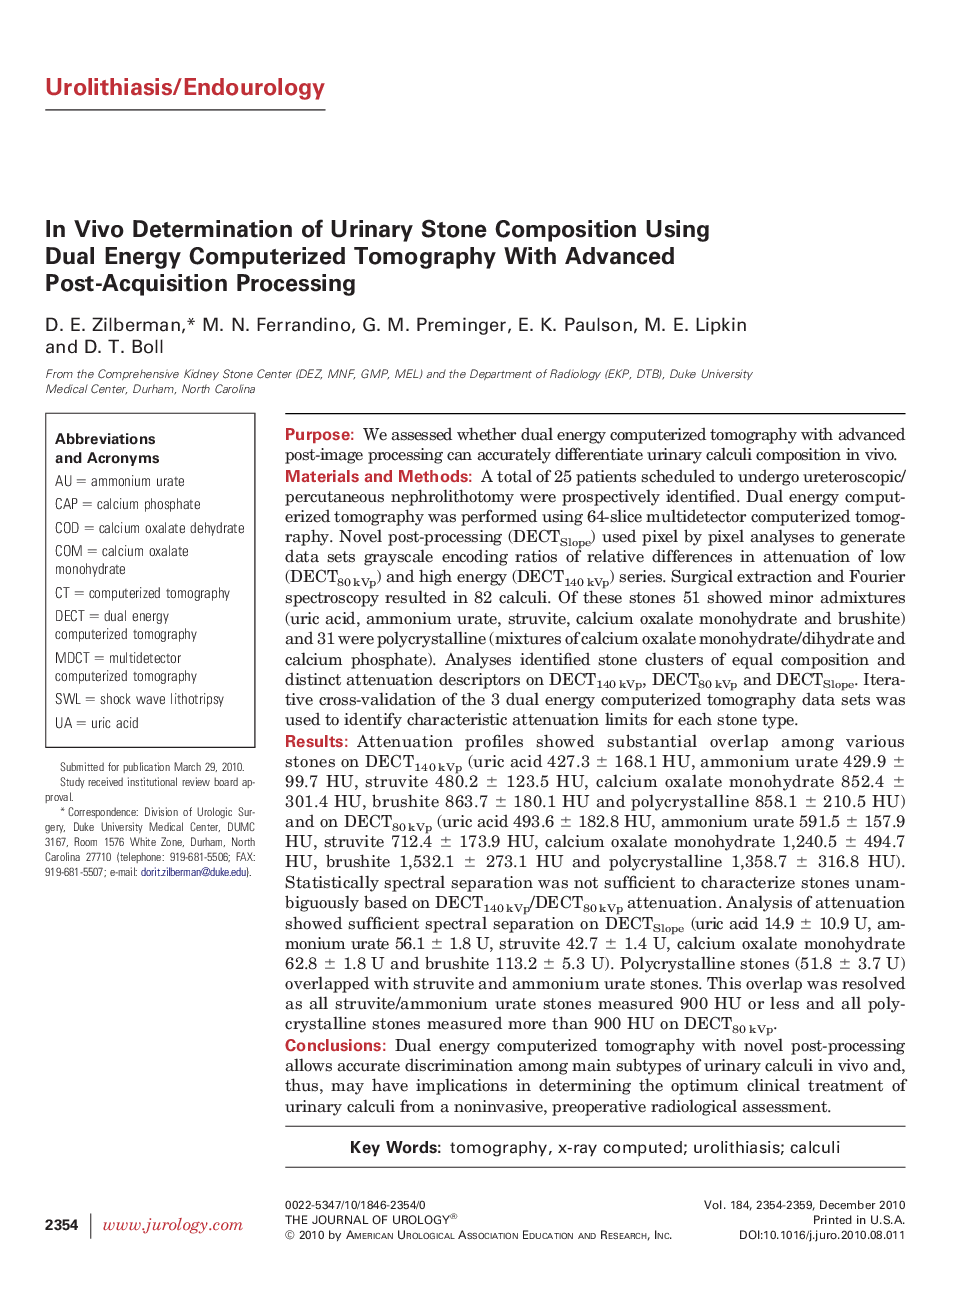 In Vivo Determination of Urinary Stone Composition Using Dual Energy Computerized Tomography With Advanced Post-Acquisition Processing